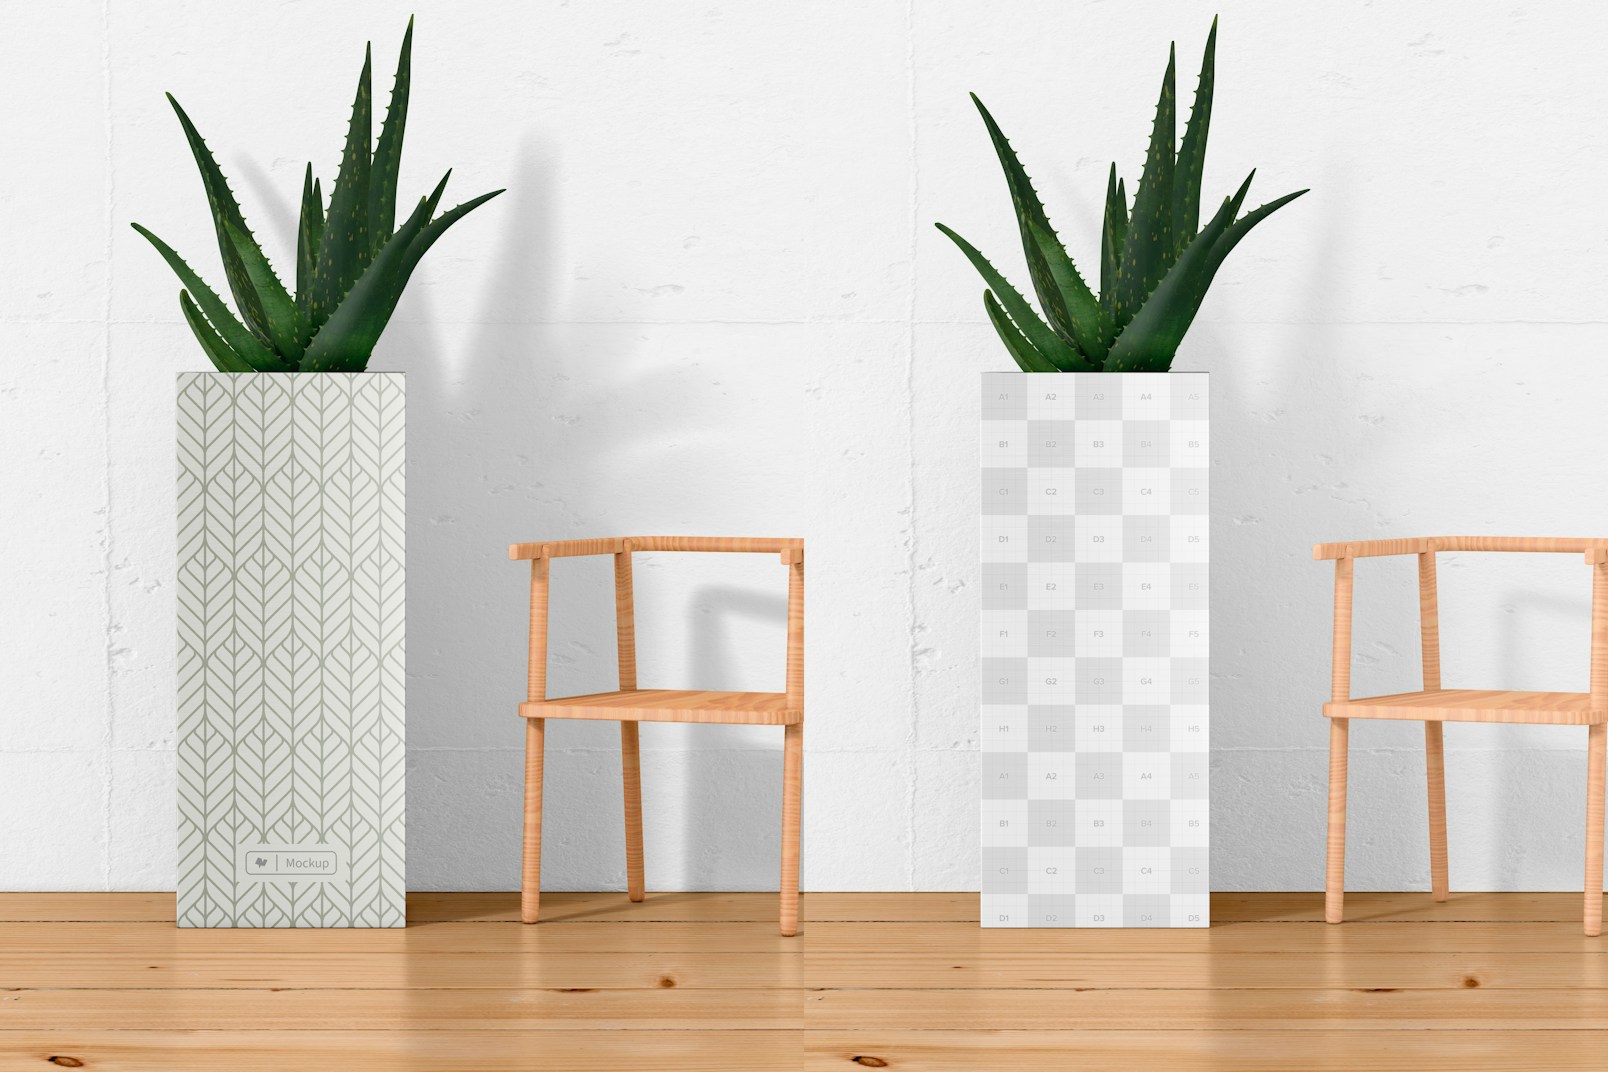 Steel Tall Planter with Chair Mockup